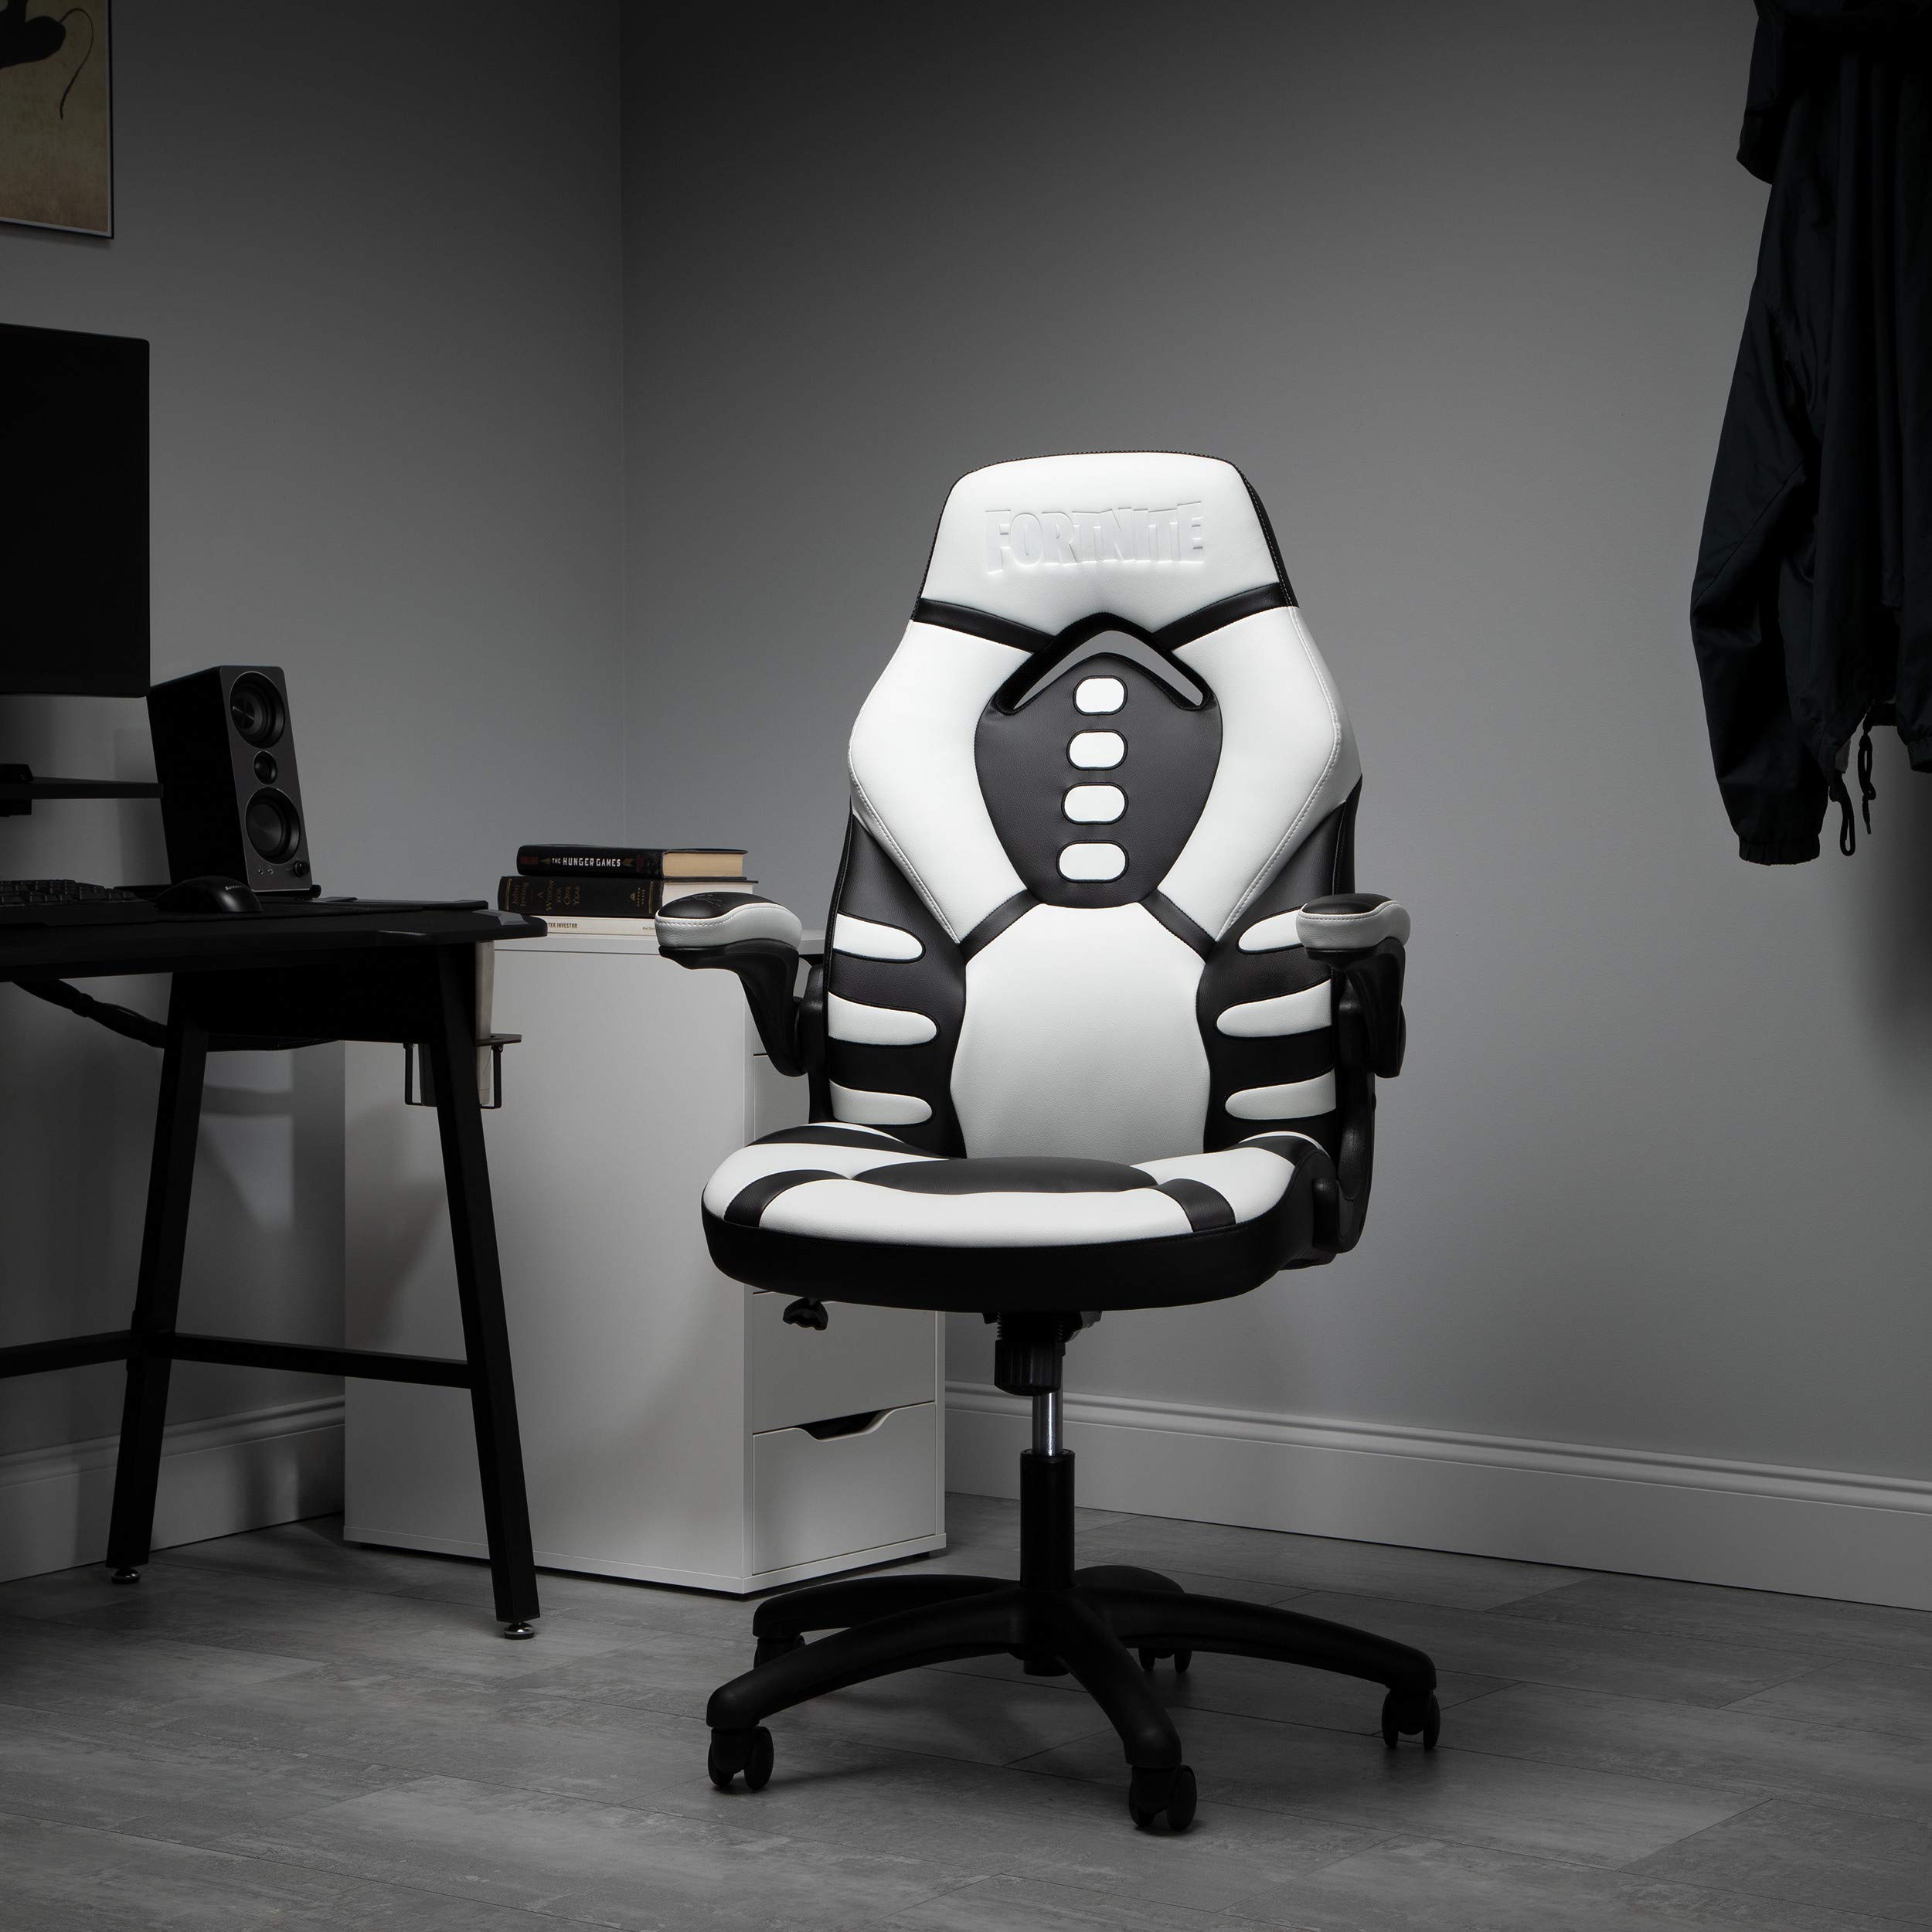 Fortnite SKULL TROOPER-V Gaming Chair, RESPAWN by OFM Reclining